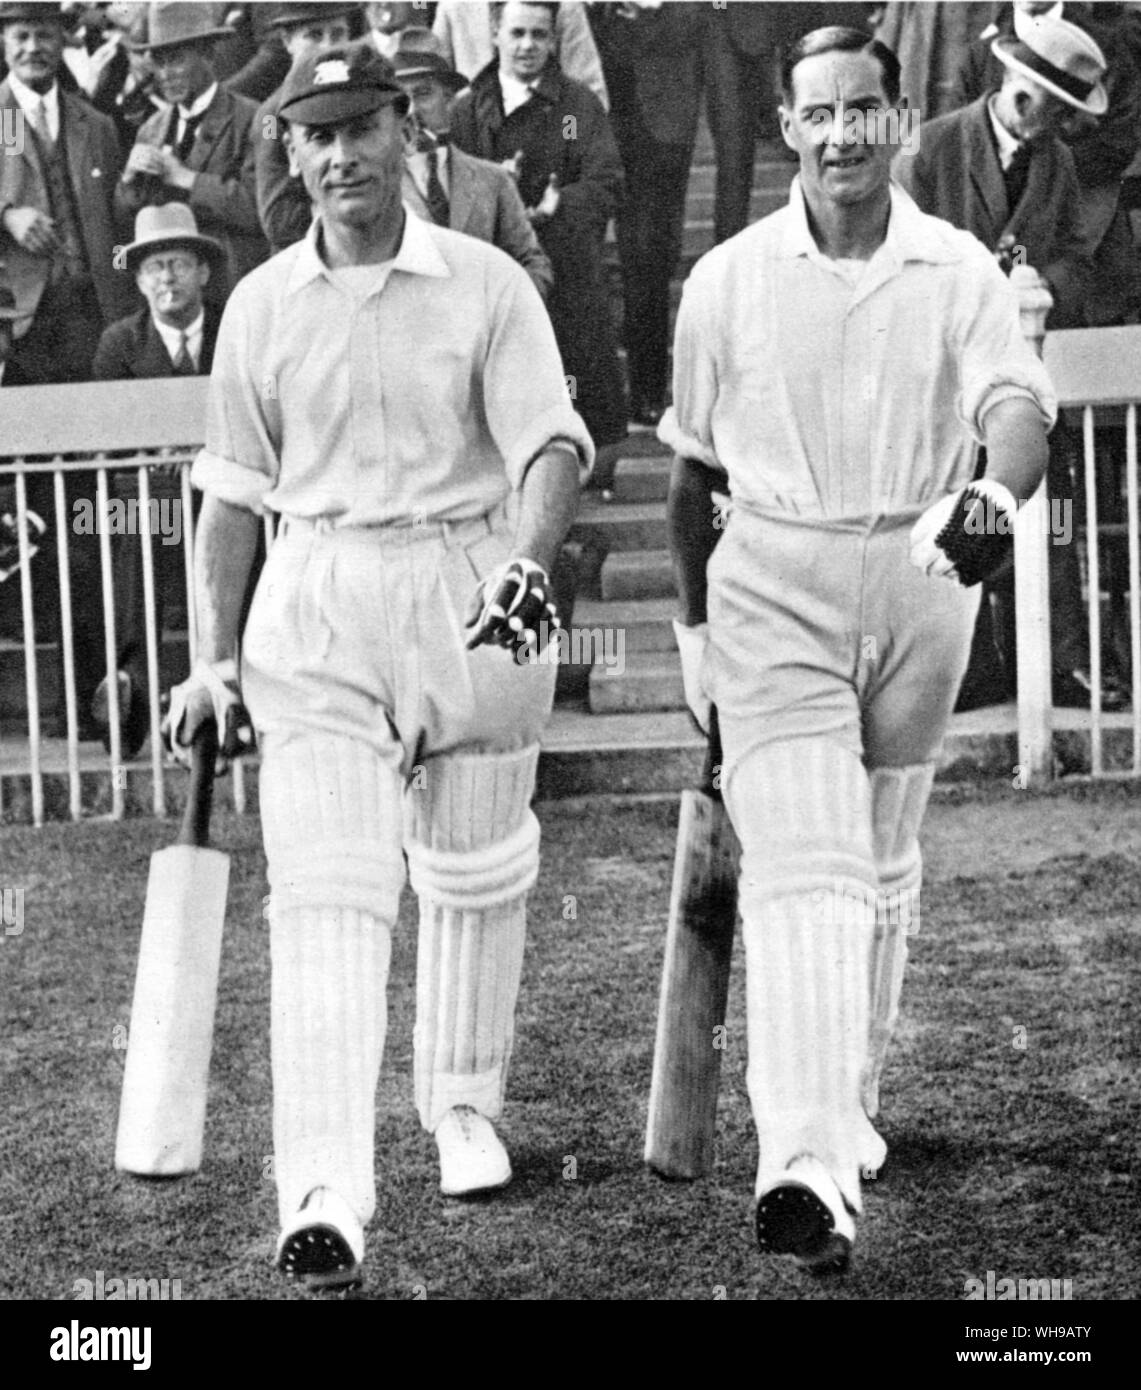 J B Hobbs and Sutcliffe, the old firm go out to open an innings for England Stock Photo